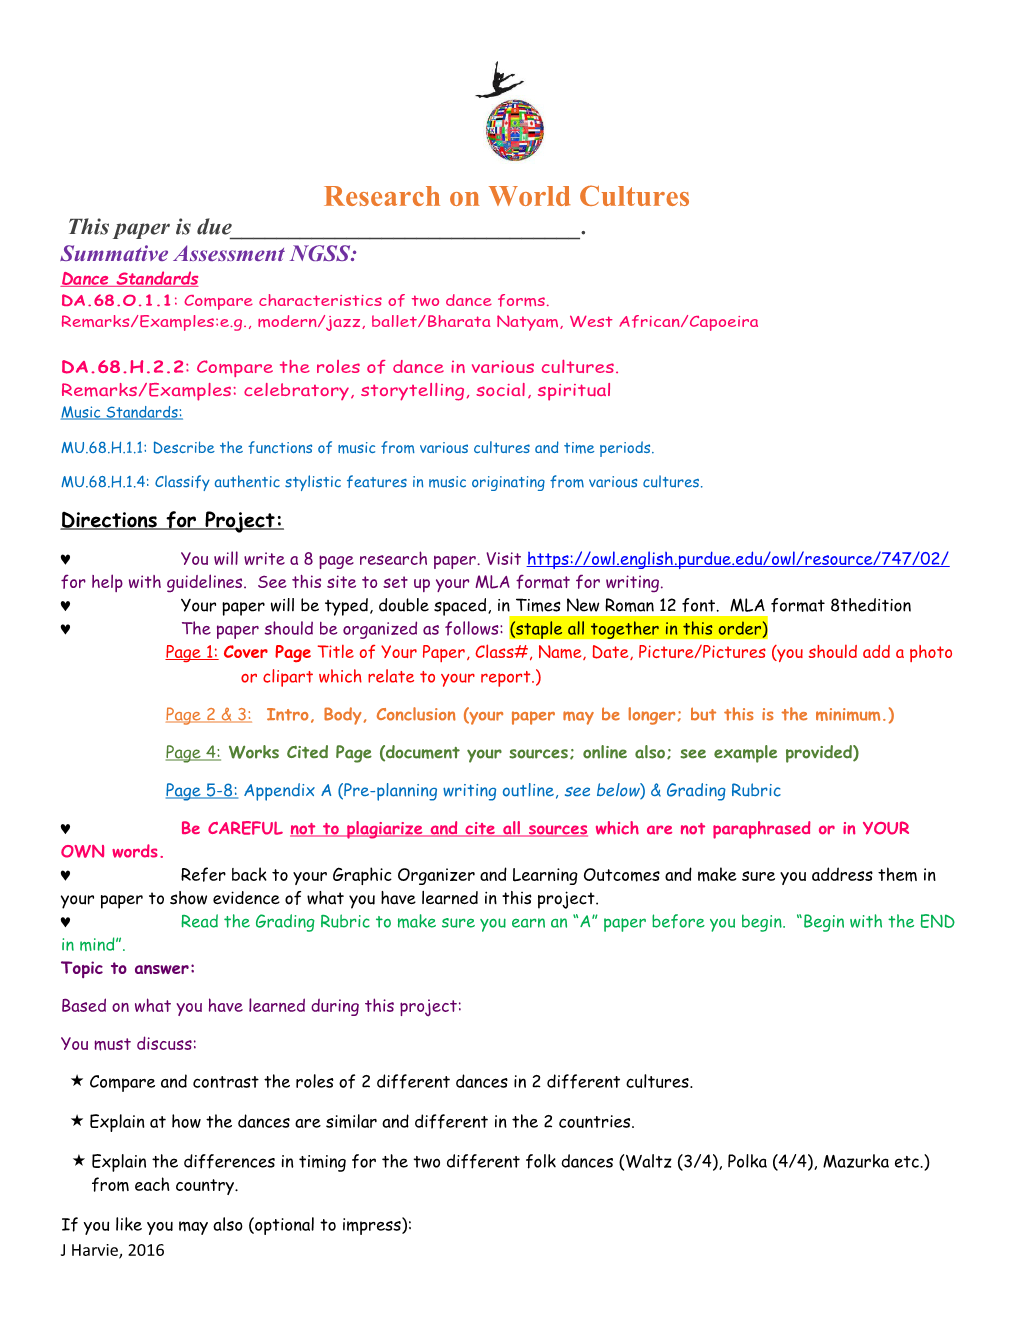 Research on World Cultures